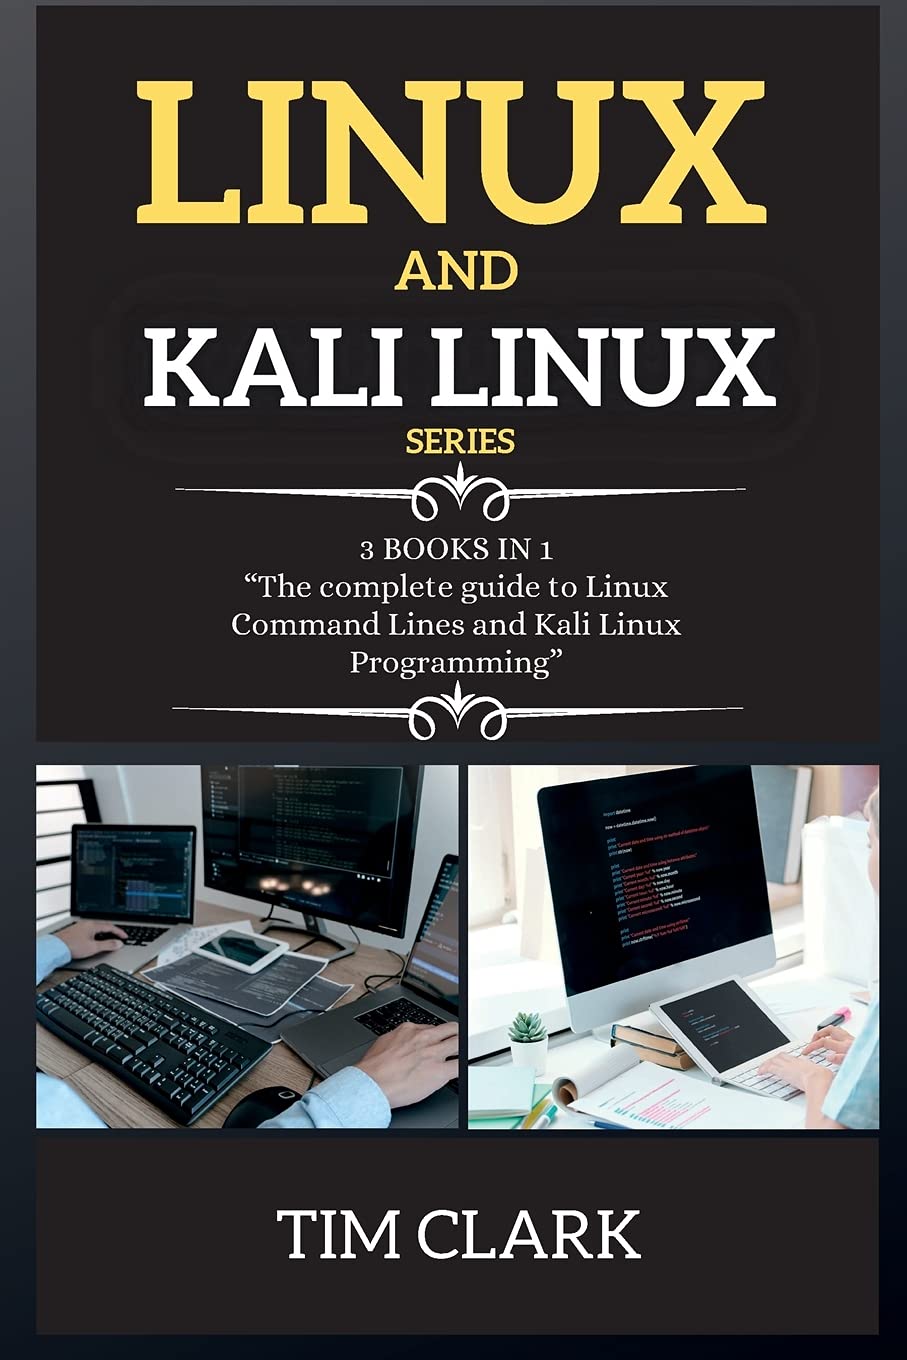 Linux and Kali Linux Series: 3 BOOKS IN 1 - The Complete Guide to Linux Command Lines and Kali Linux Programming (Paperback)